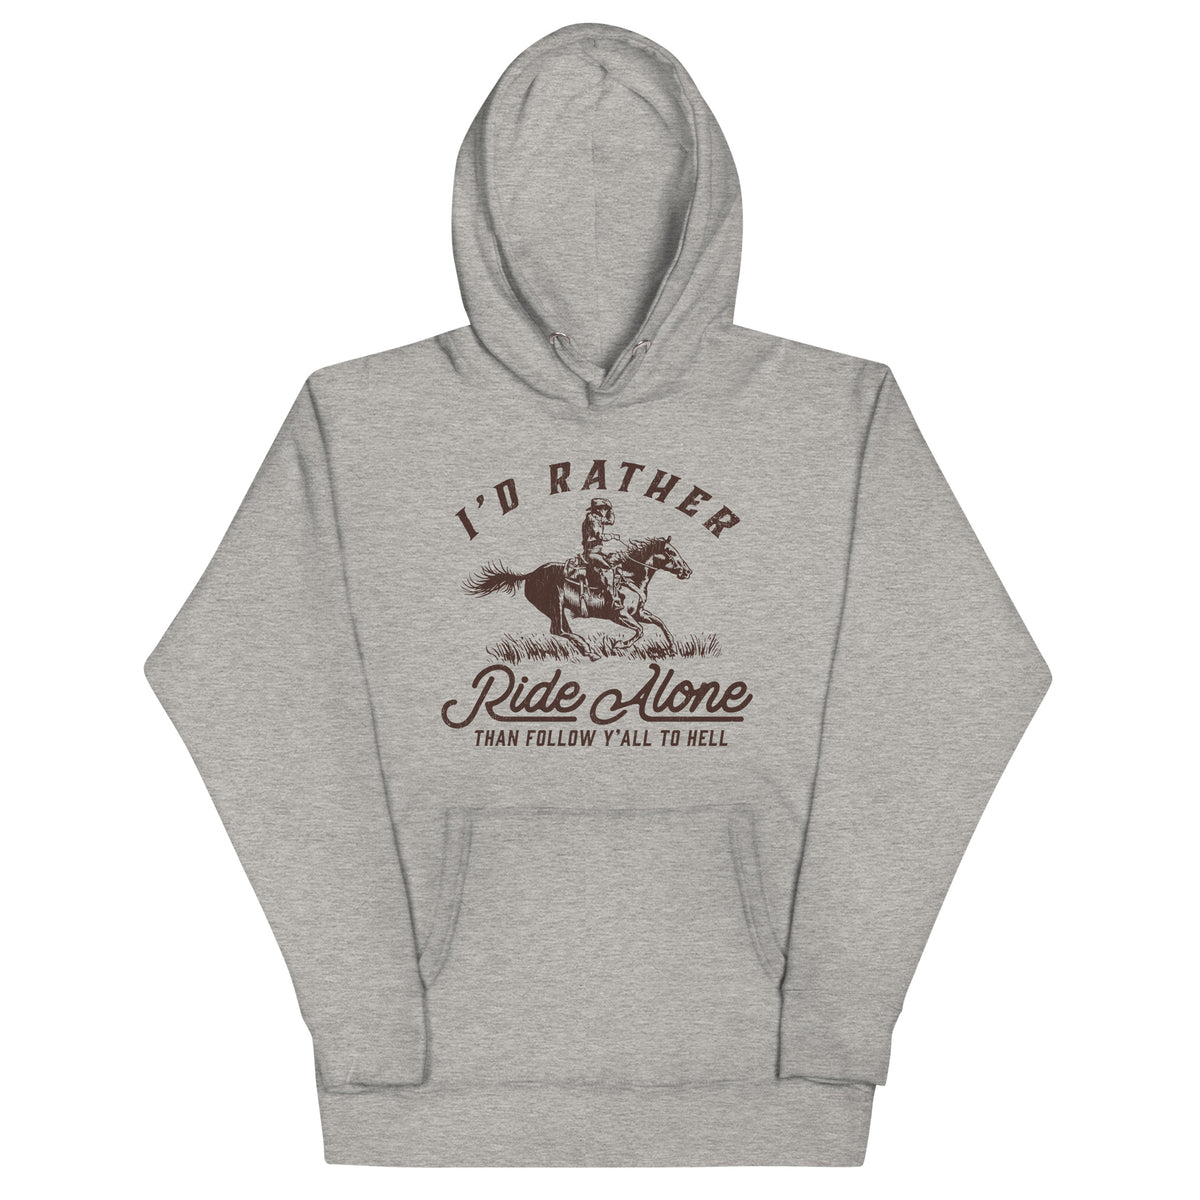 I&#39;s Rather Ride Alone Than Follow You All To Hell Unisex Hoodie